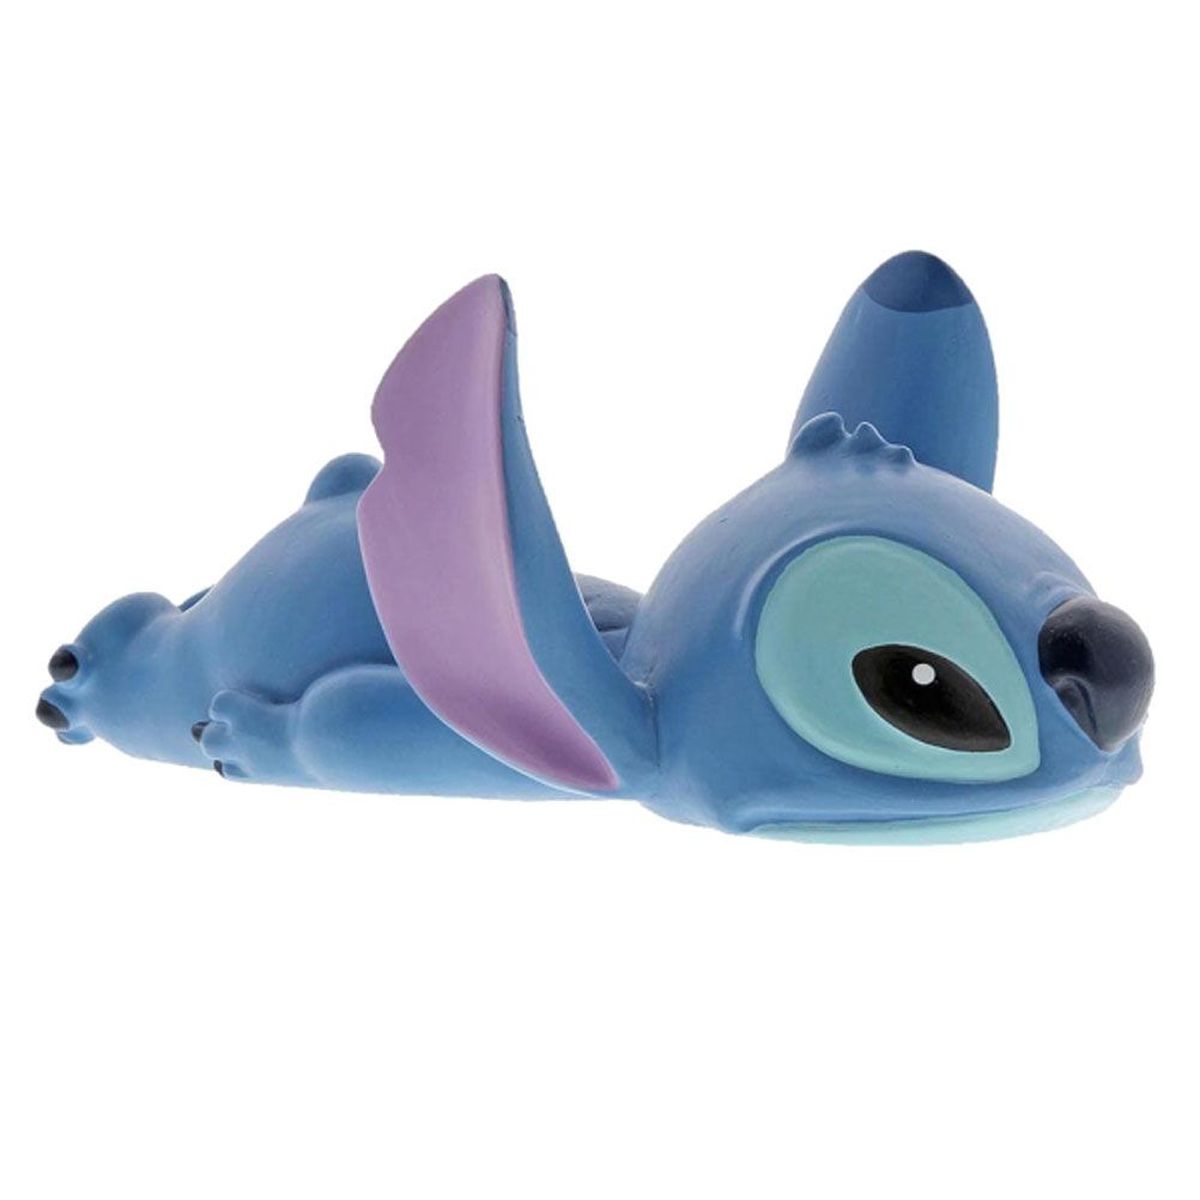 Stitch Laying Down collection statuette